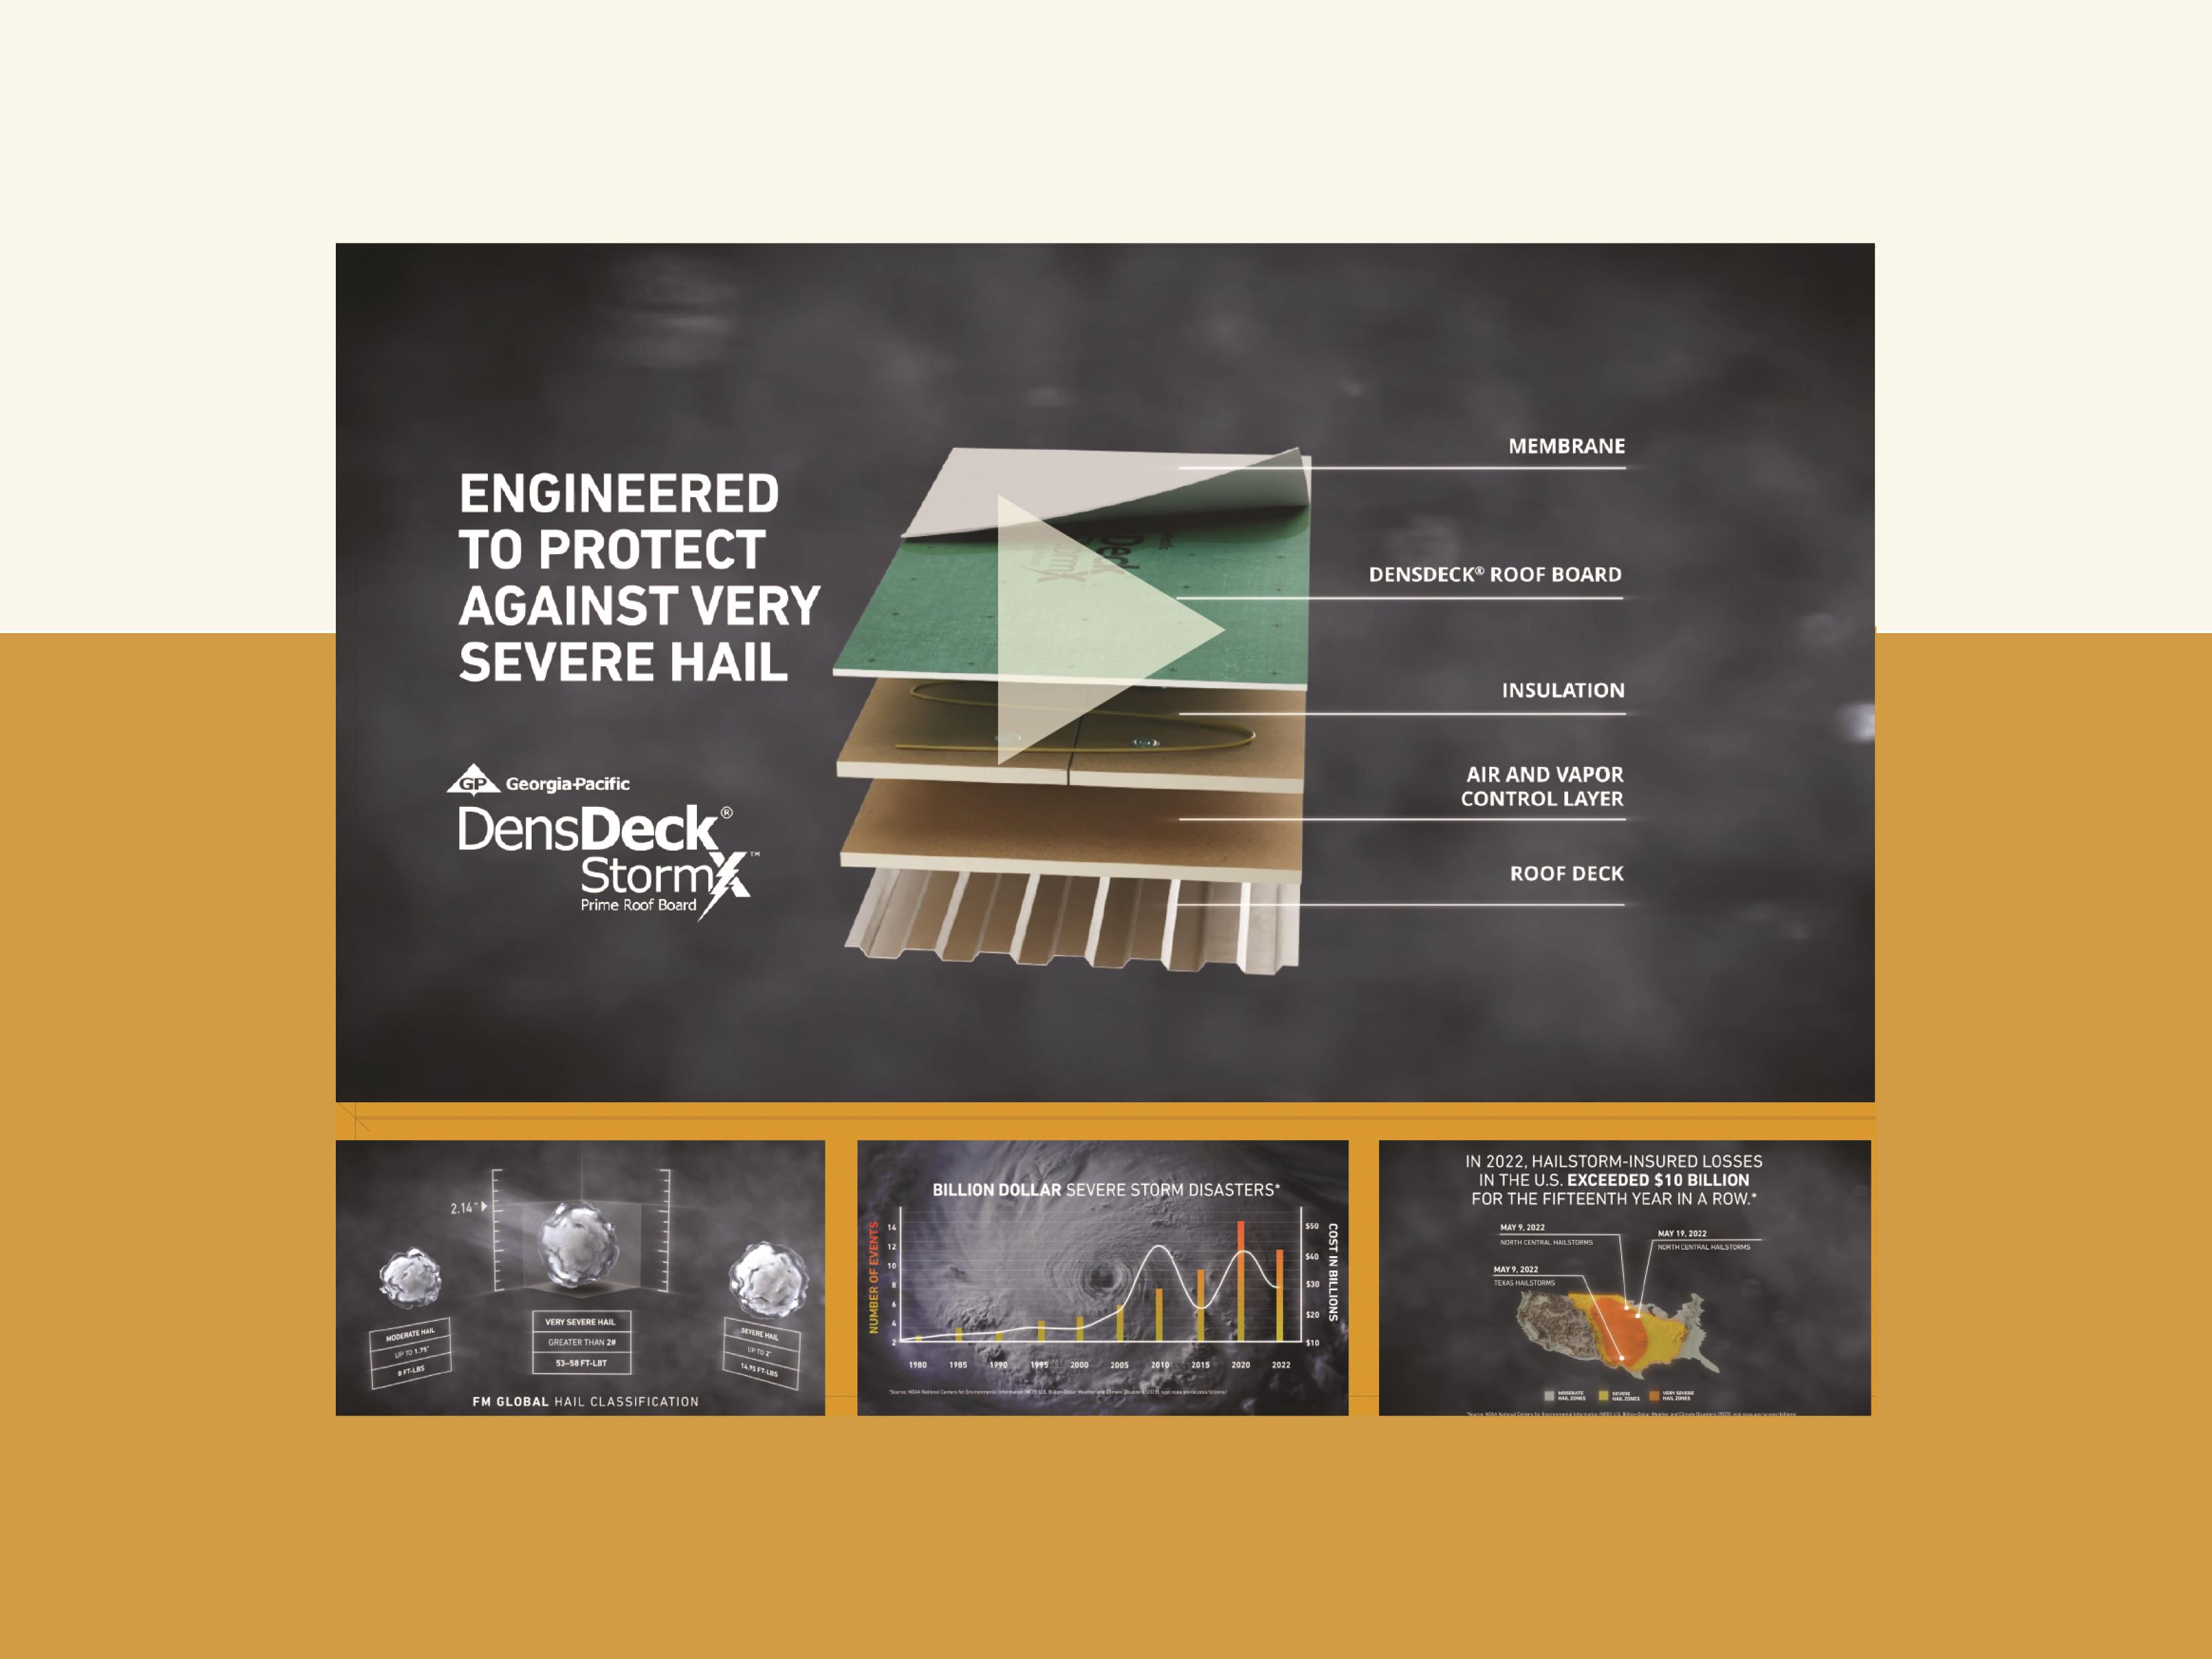 DensDeck - StormX Bbook and Video Campaign